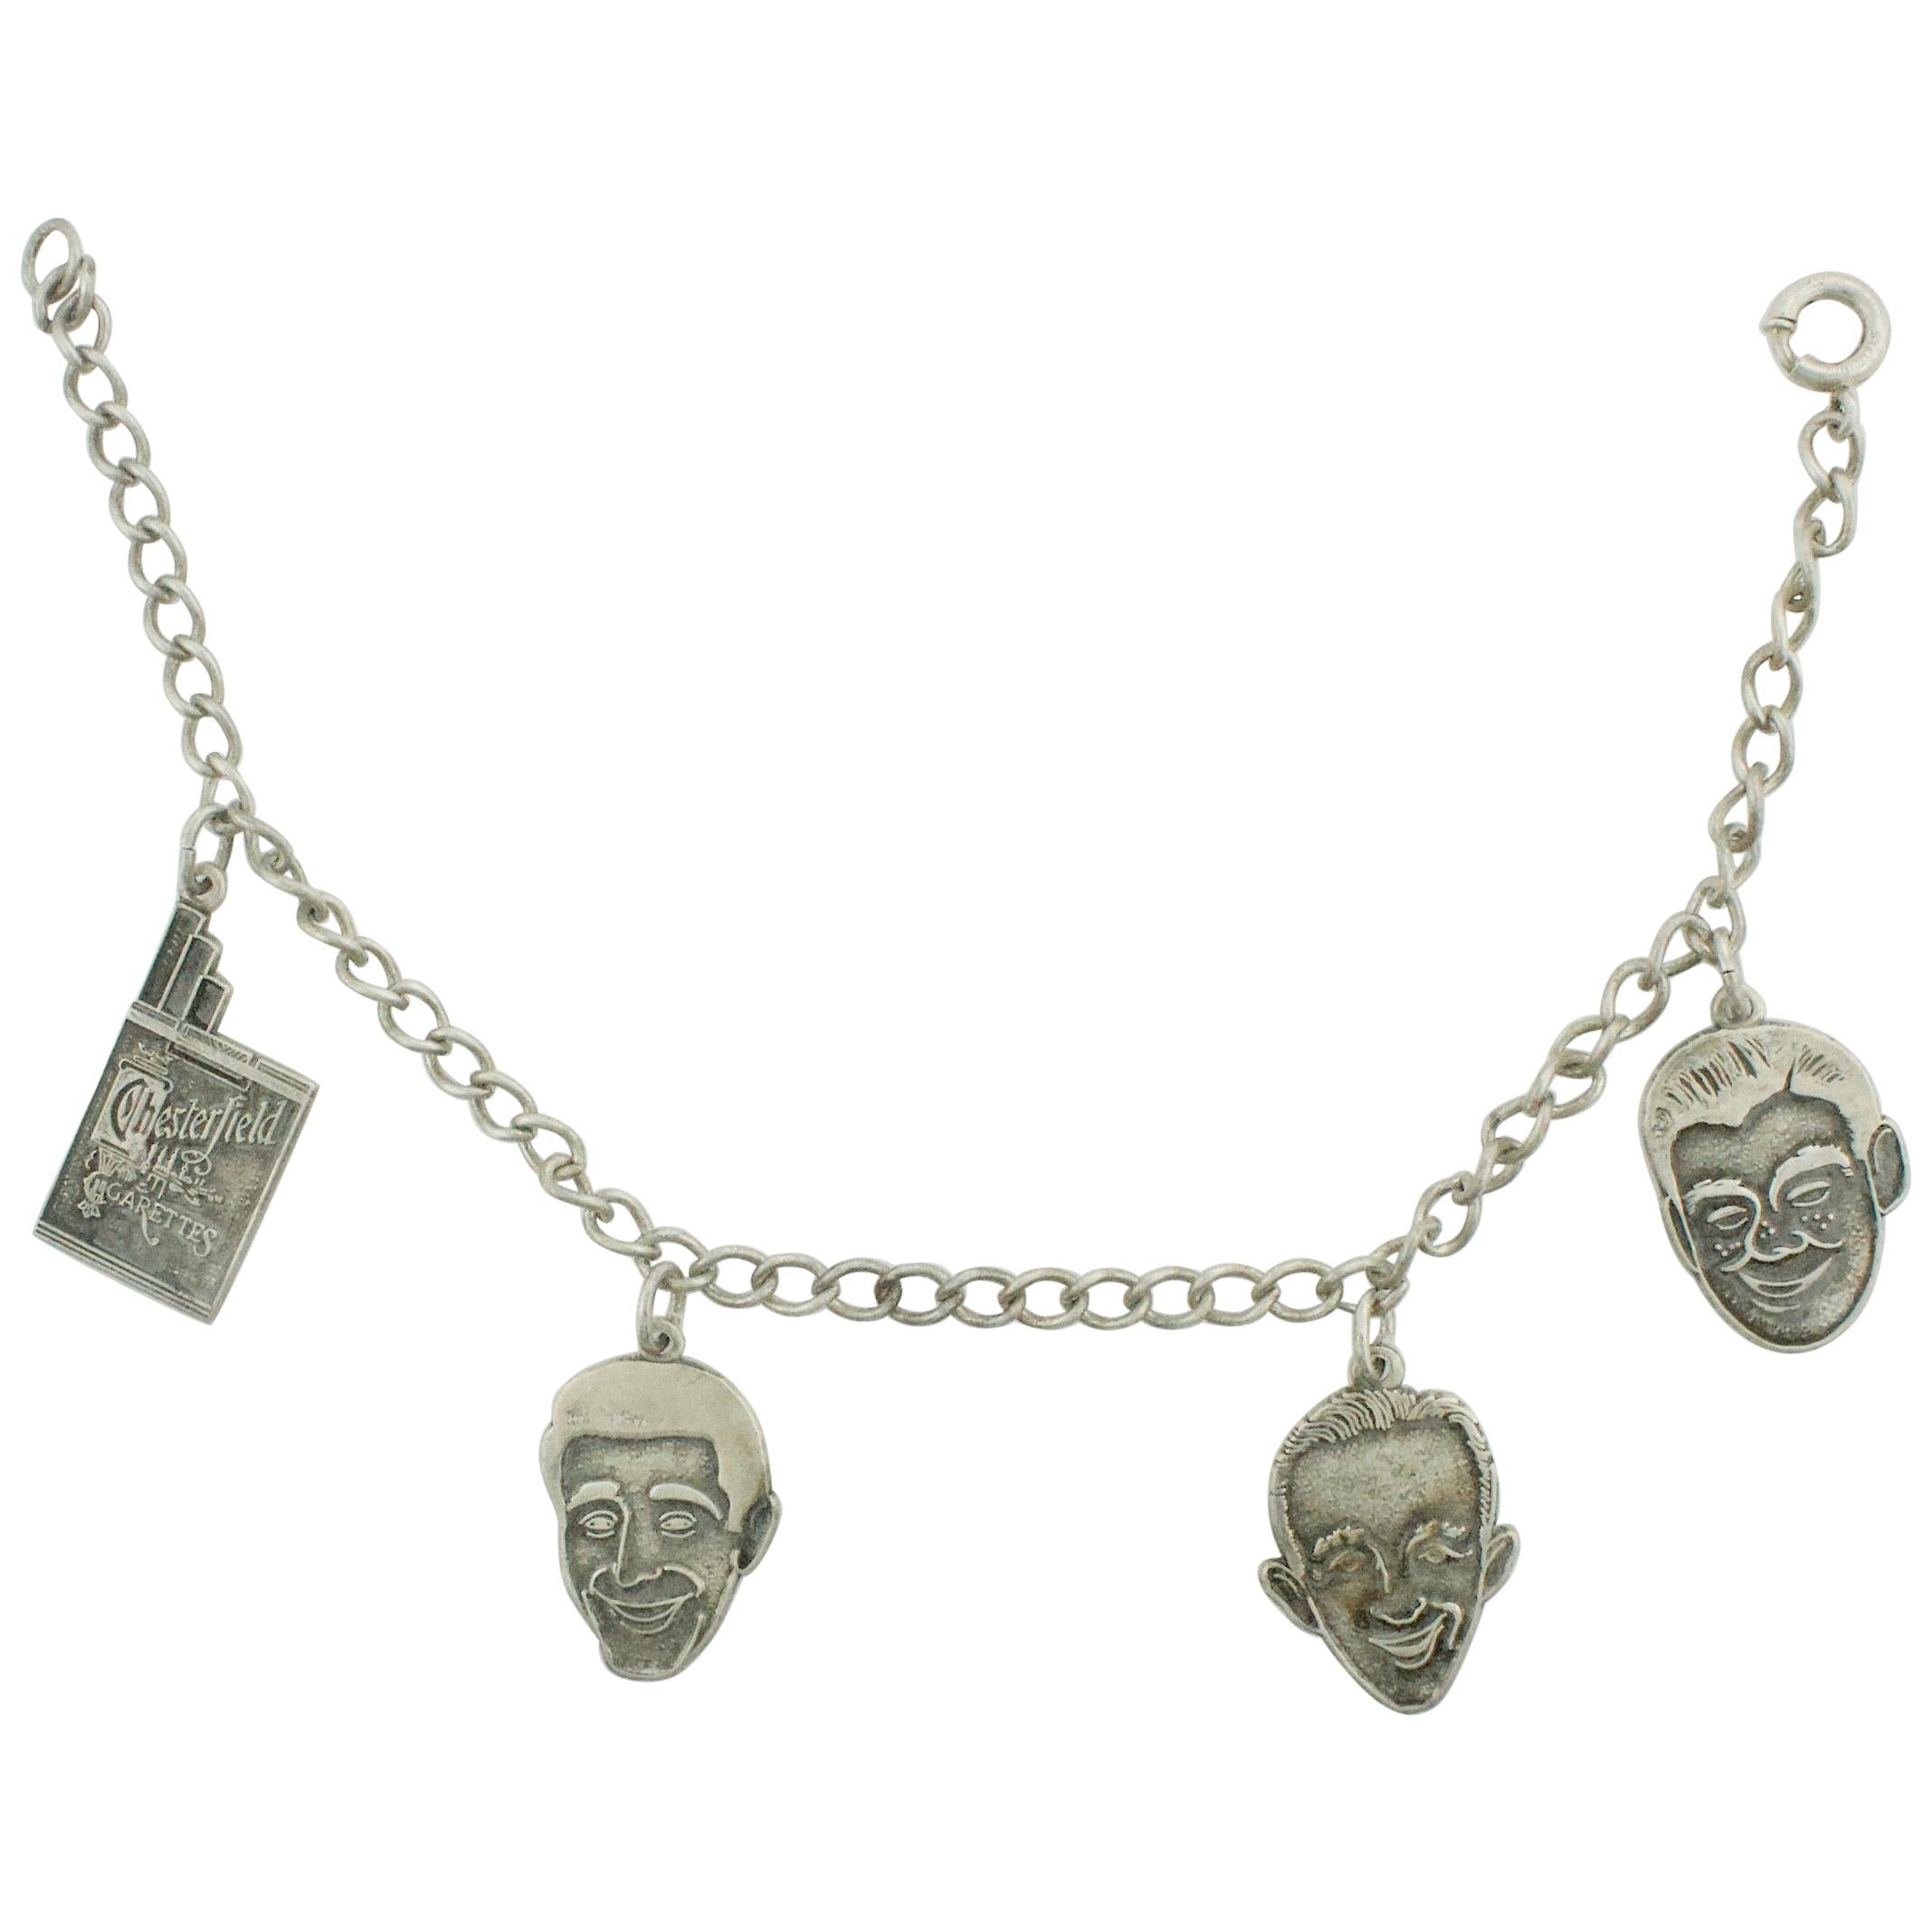 American Celebrity Charm Bracelet in Sterling Silver Circa 1950 For Sale